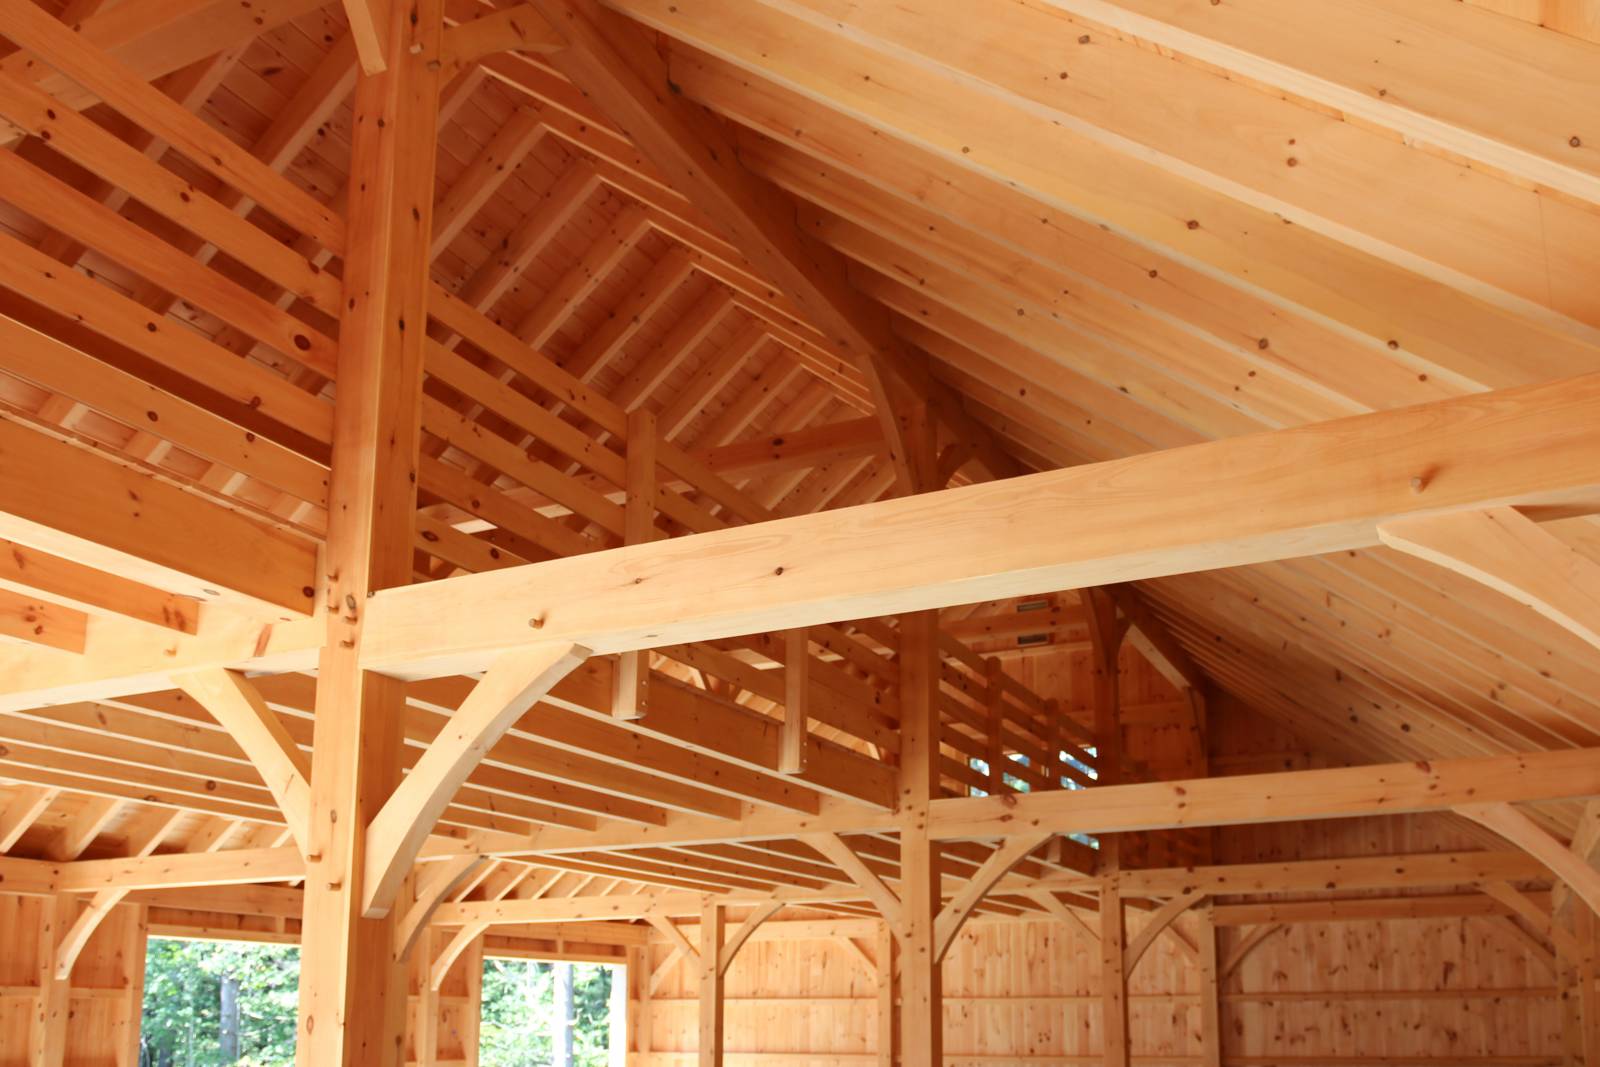 Floor-to-Celing Posts & Authentic Timber Frame Joinery